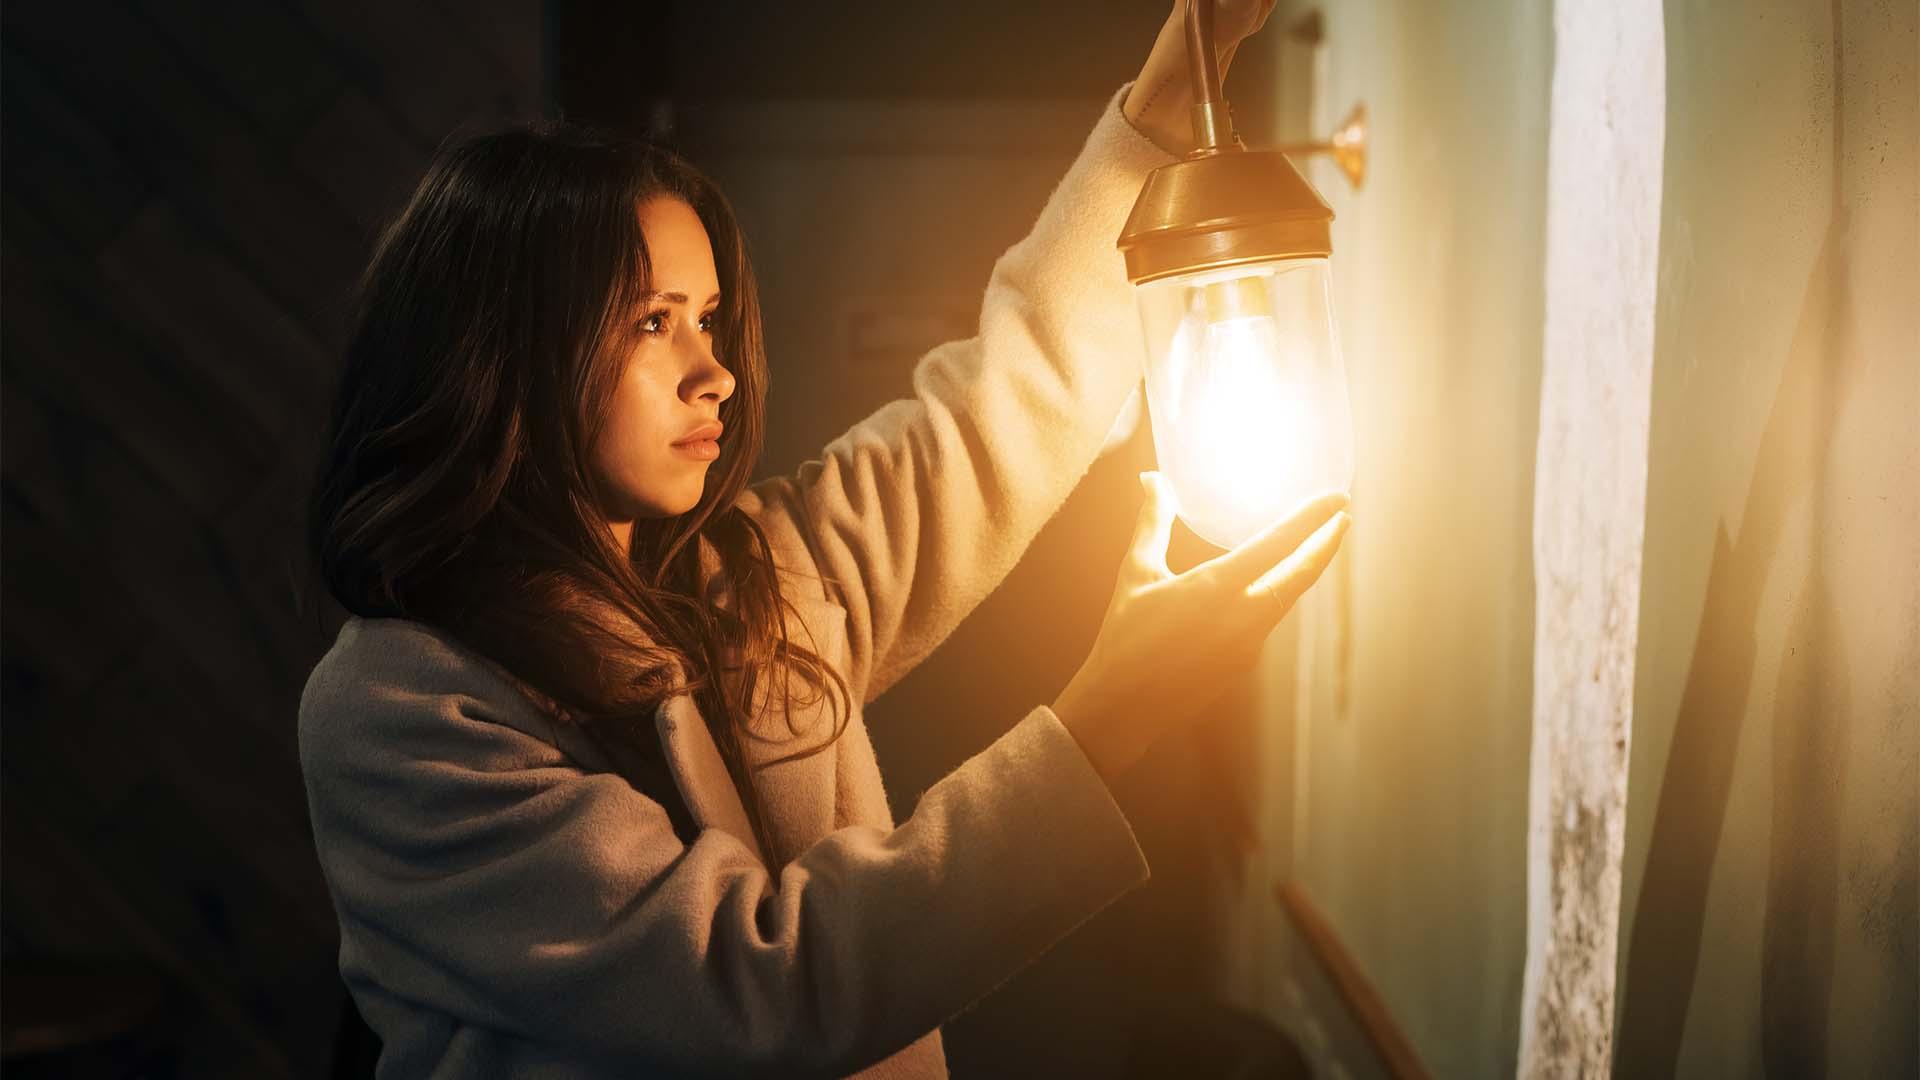 3 Common Mistakes You Make When Lighting Your Home (and How to Fix Them) - FENLO